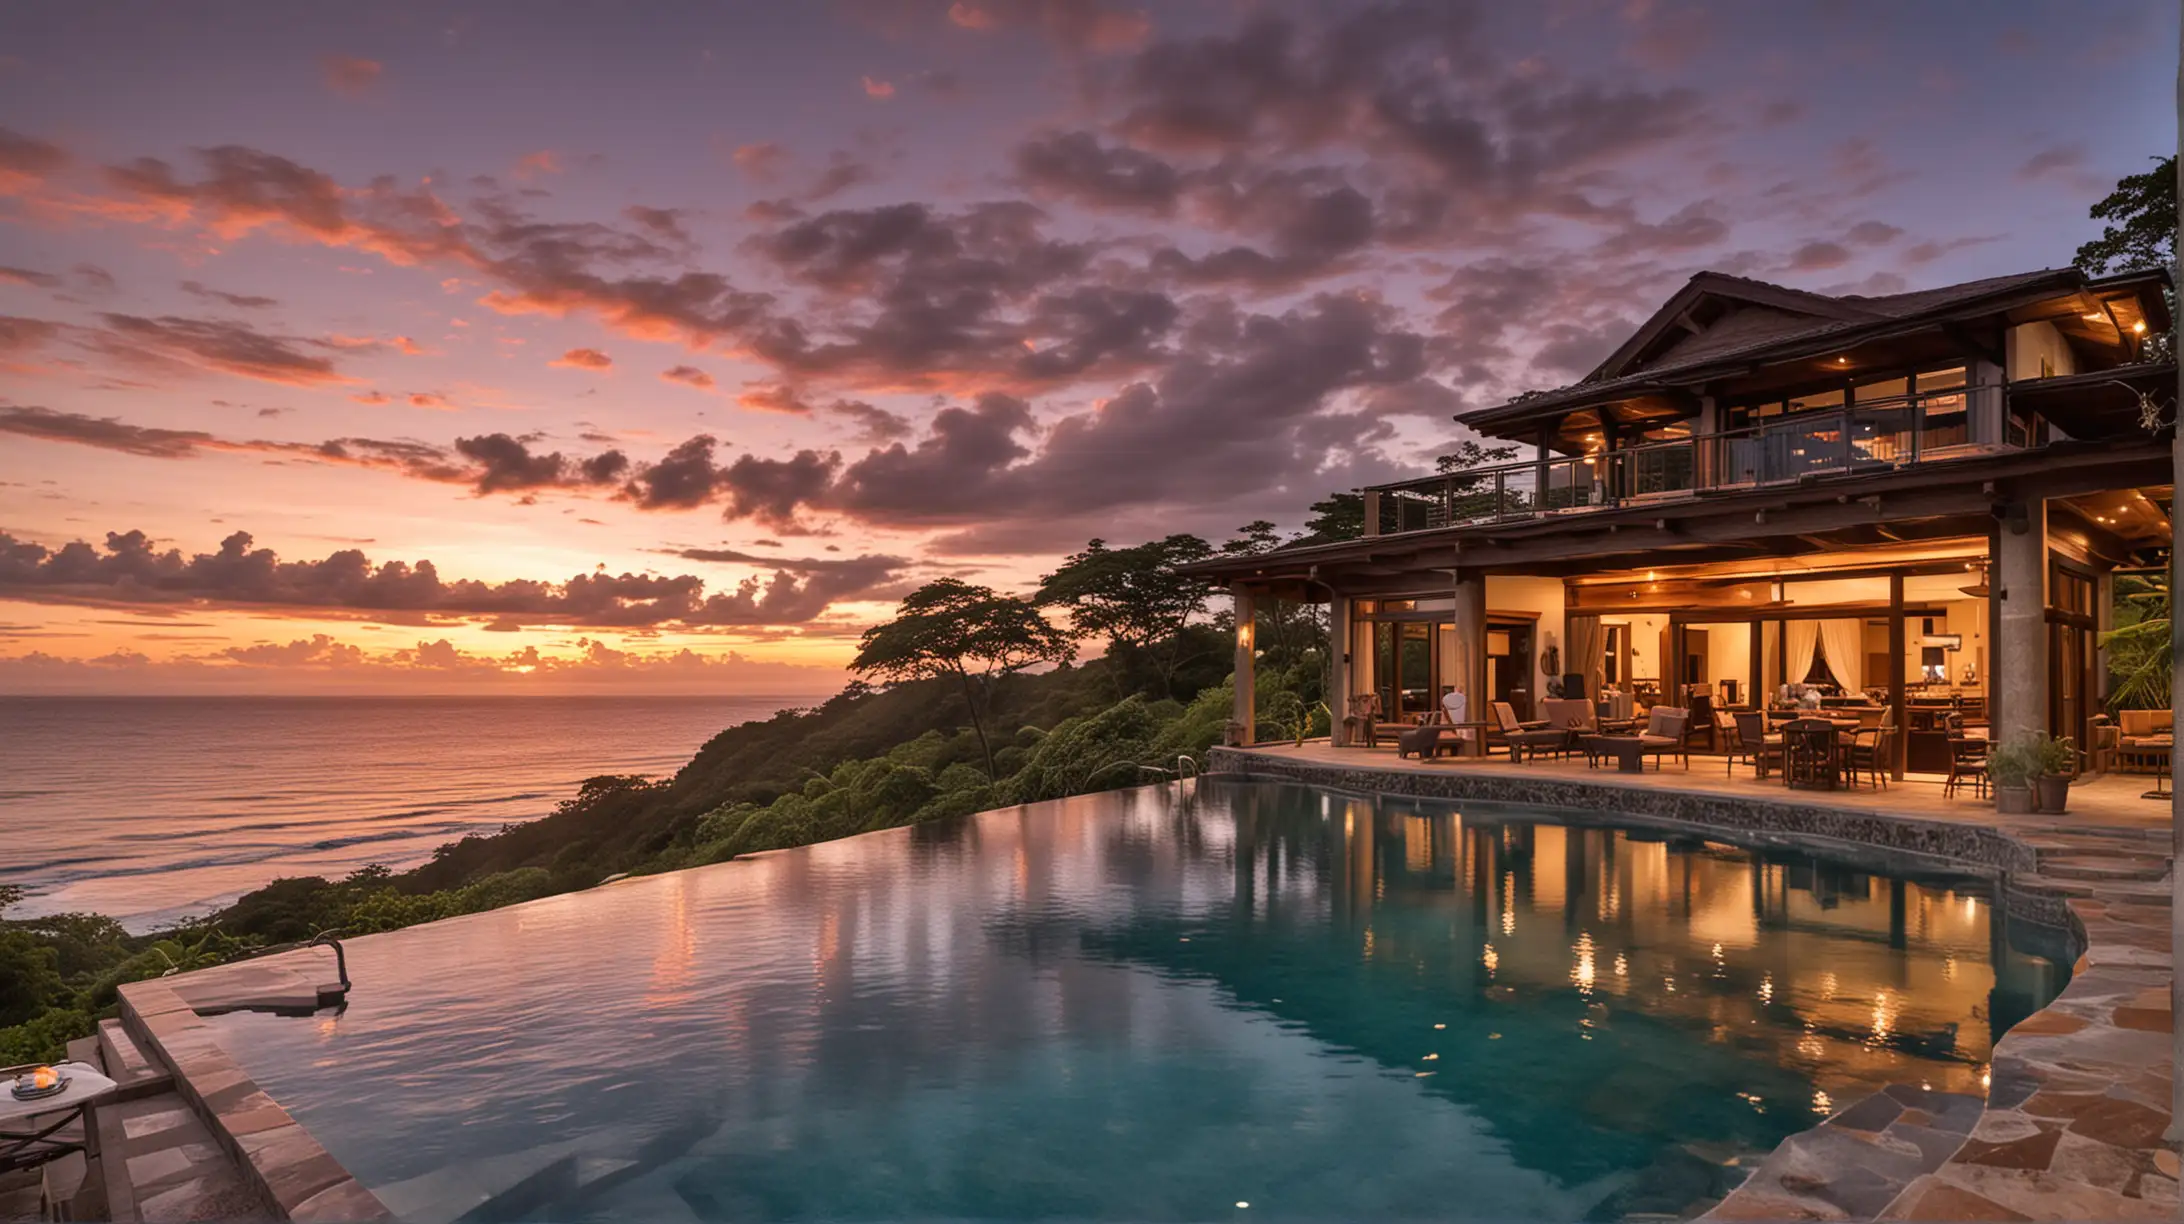 please give me a photo of a oceanfront vacation property in costa rica at sunset with an infinity pool and outdoor living spaces.